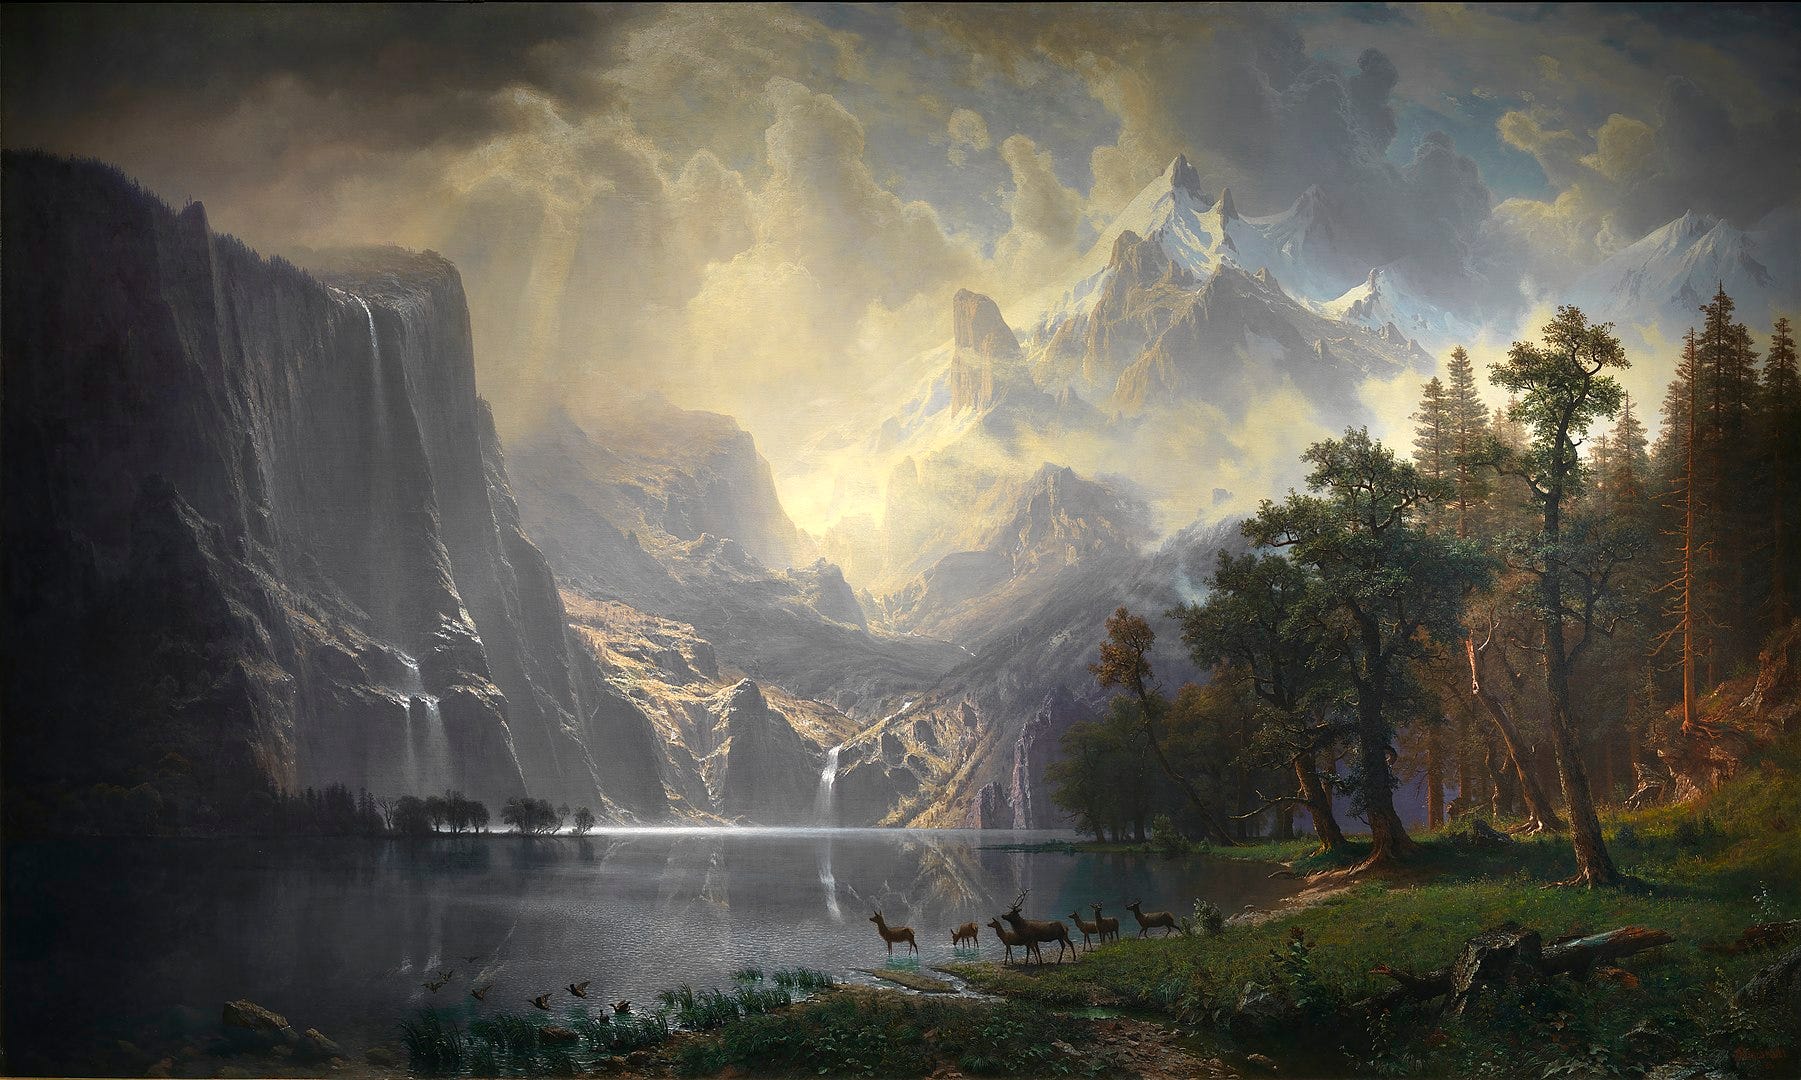 A painting depicts rugged mountains on the left and background that reach out to a bright sky with the Sun's rays peeking through the clouds. The mountains look over a calm lake with a group of deer and waterfowl on its edge and is bordered by trees on the right side of the painting